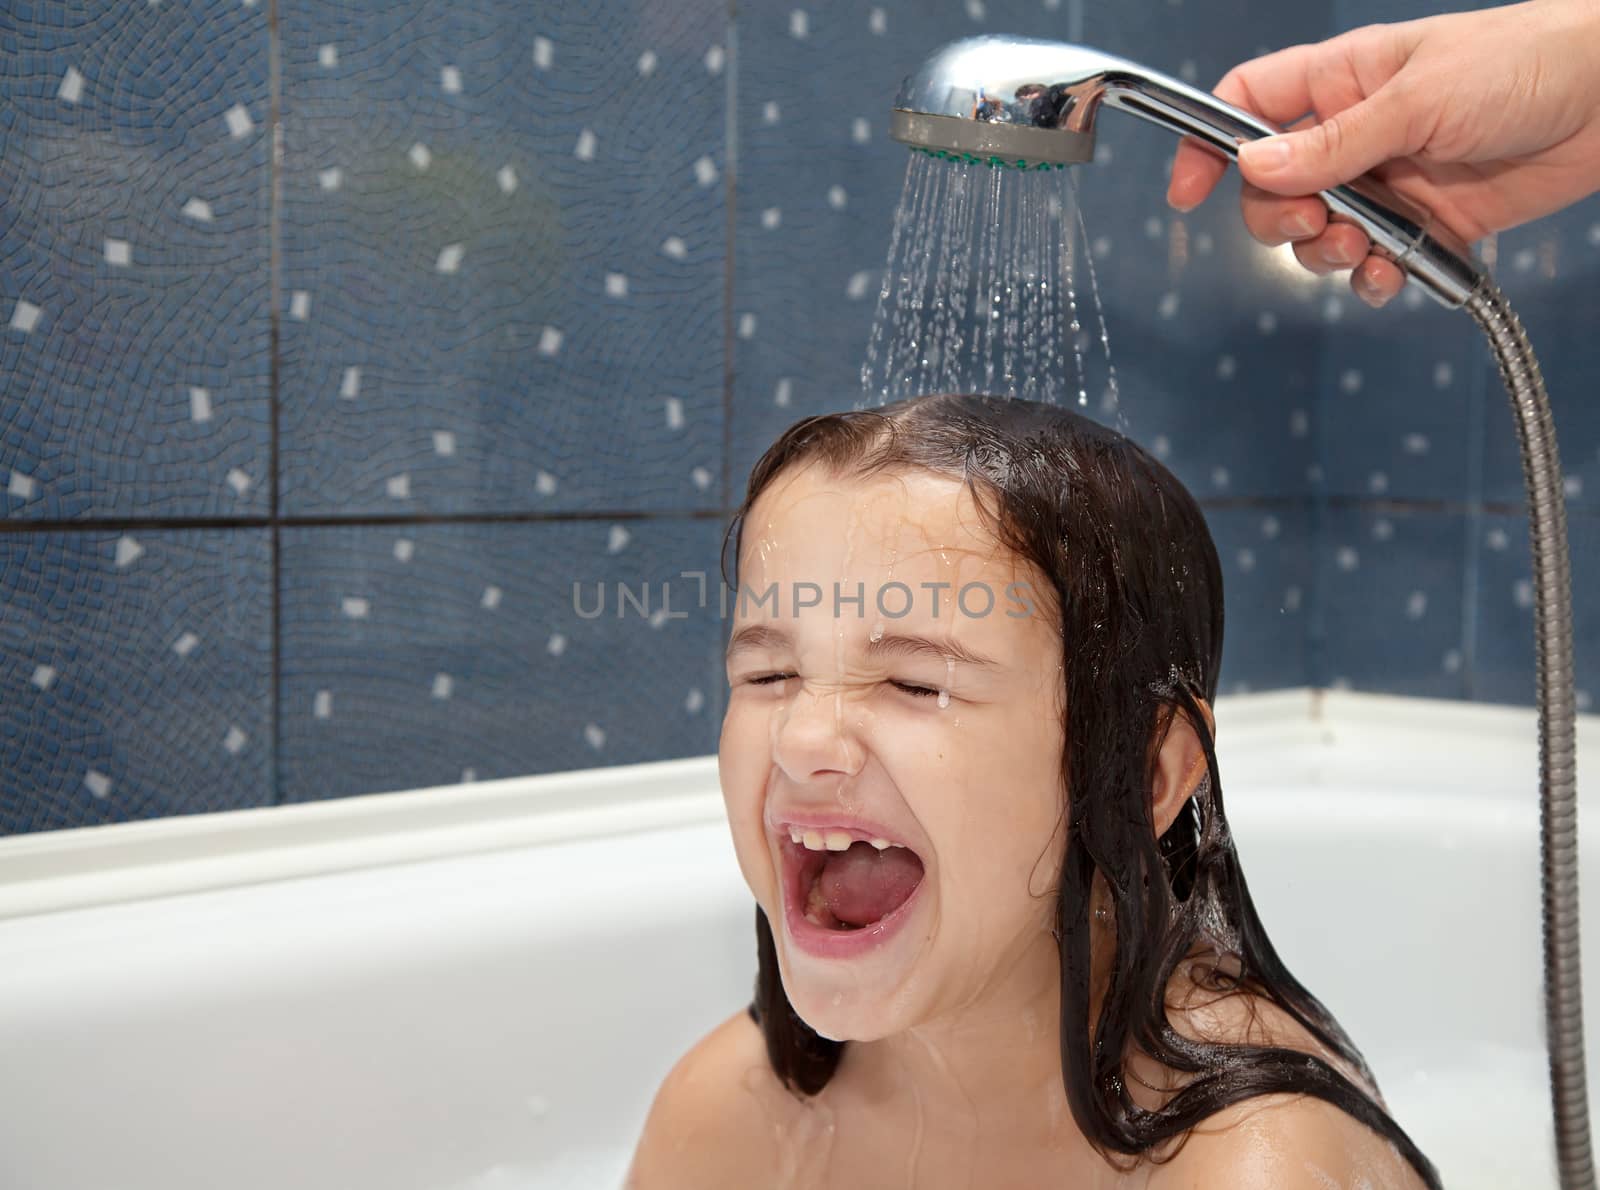 mothers's hand pours a little girl out of the shower in the bathroom